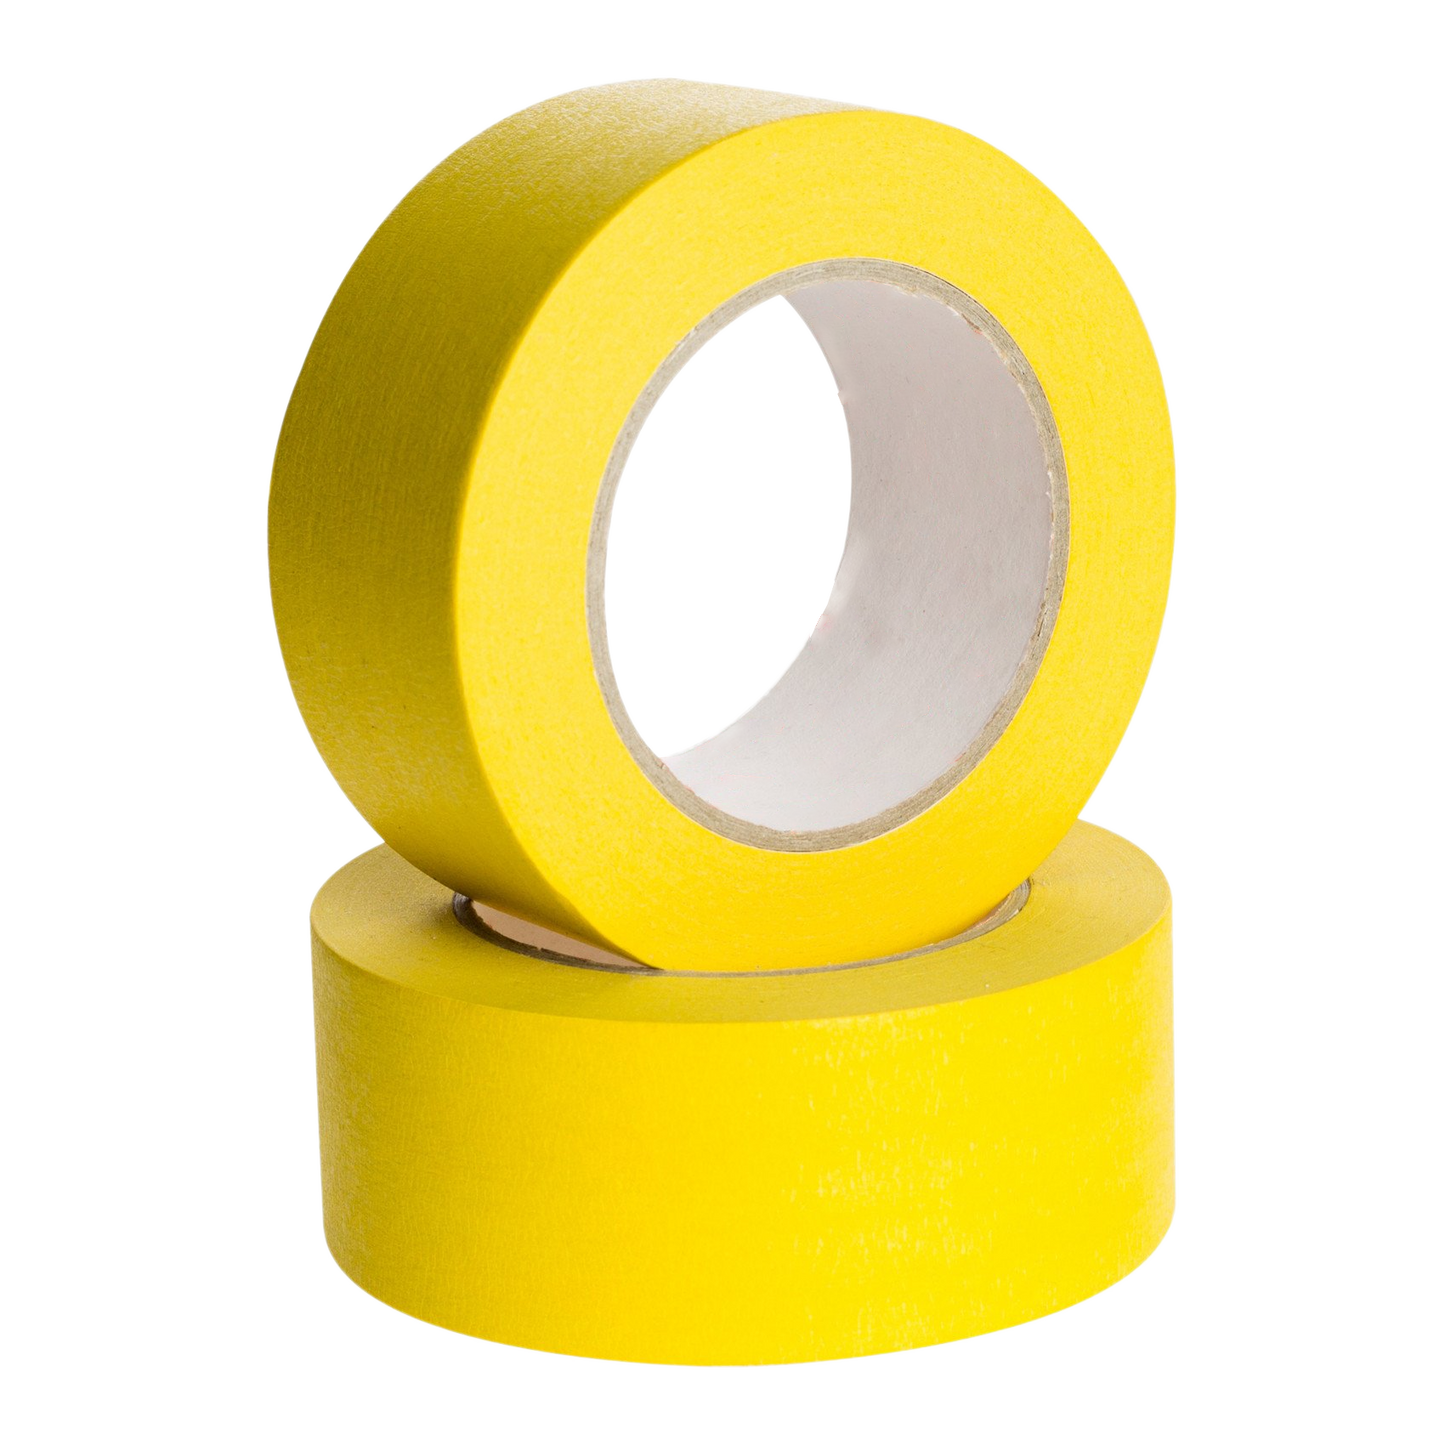 Masking Tapes - High Temp & Bleed Resistant